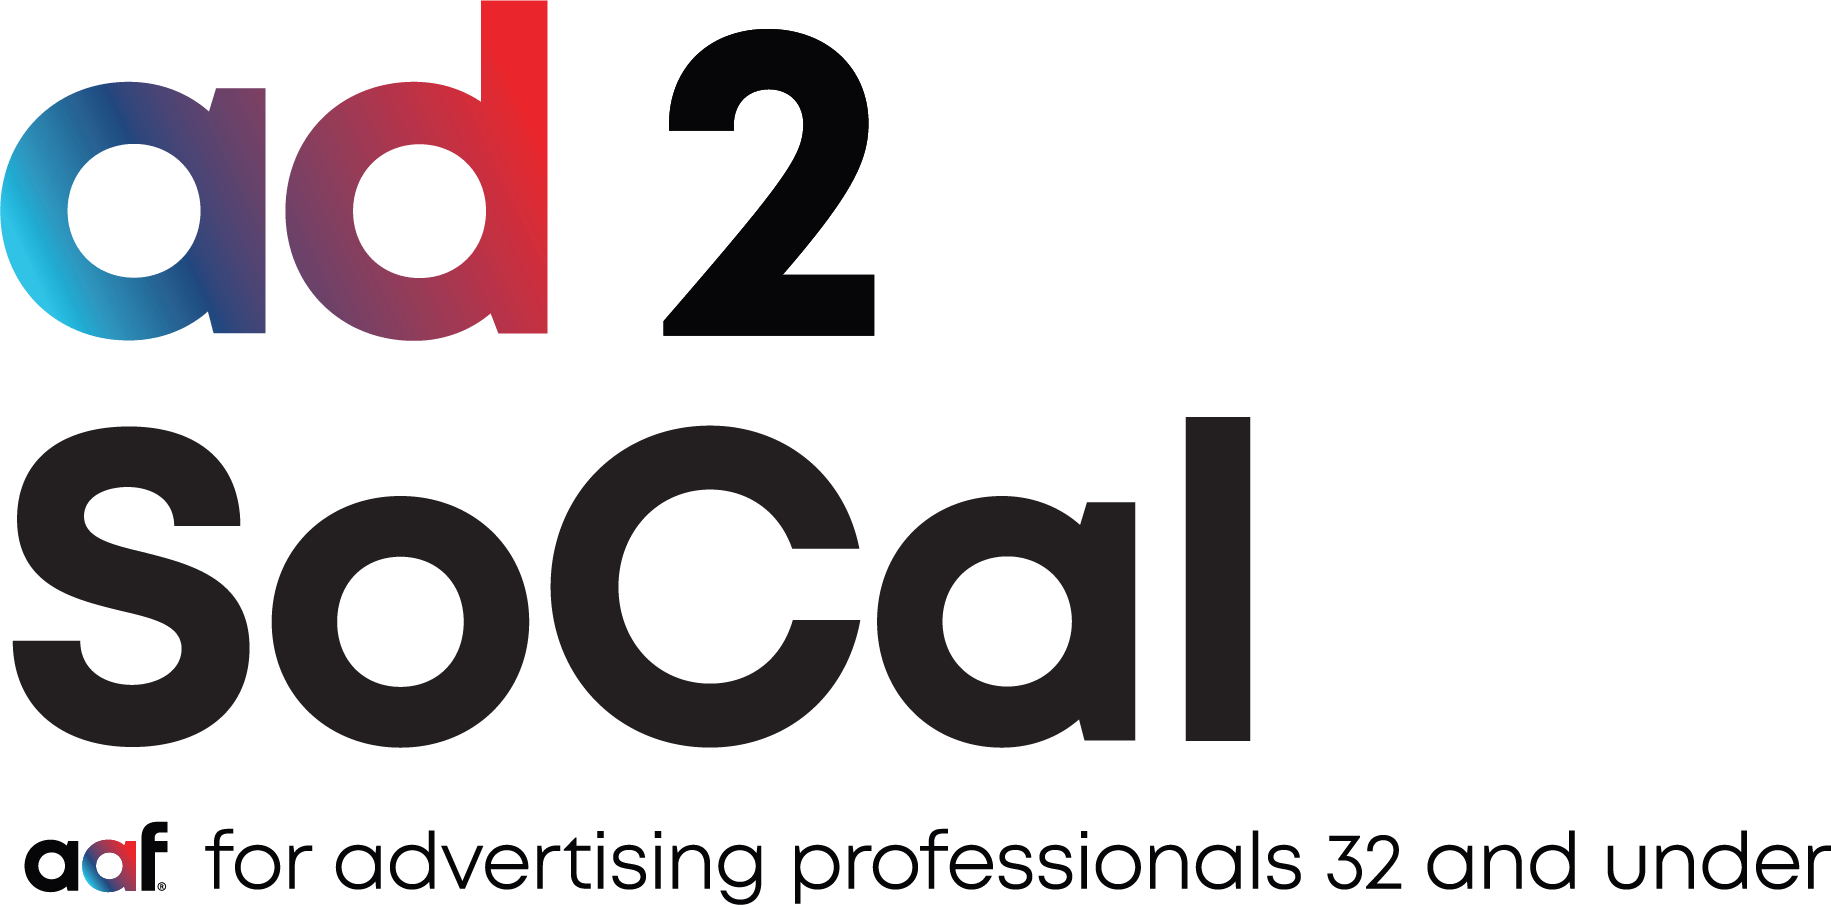 Ad 2 SoCal Logo - for advertising professionals 32 and under